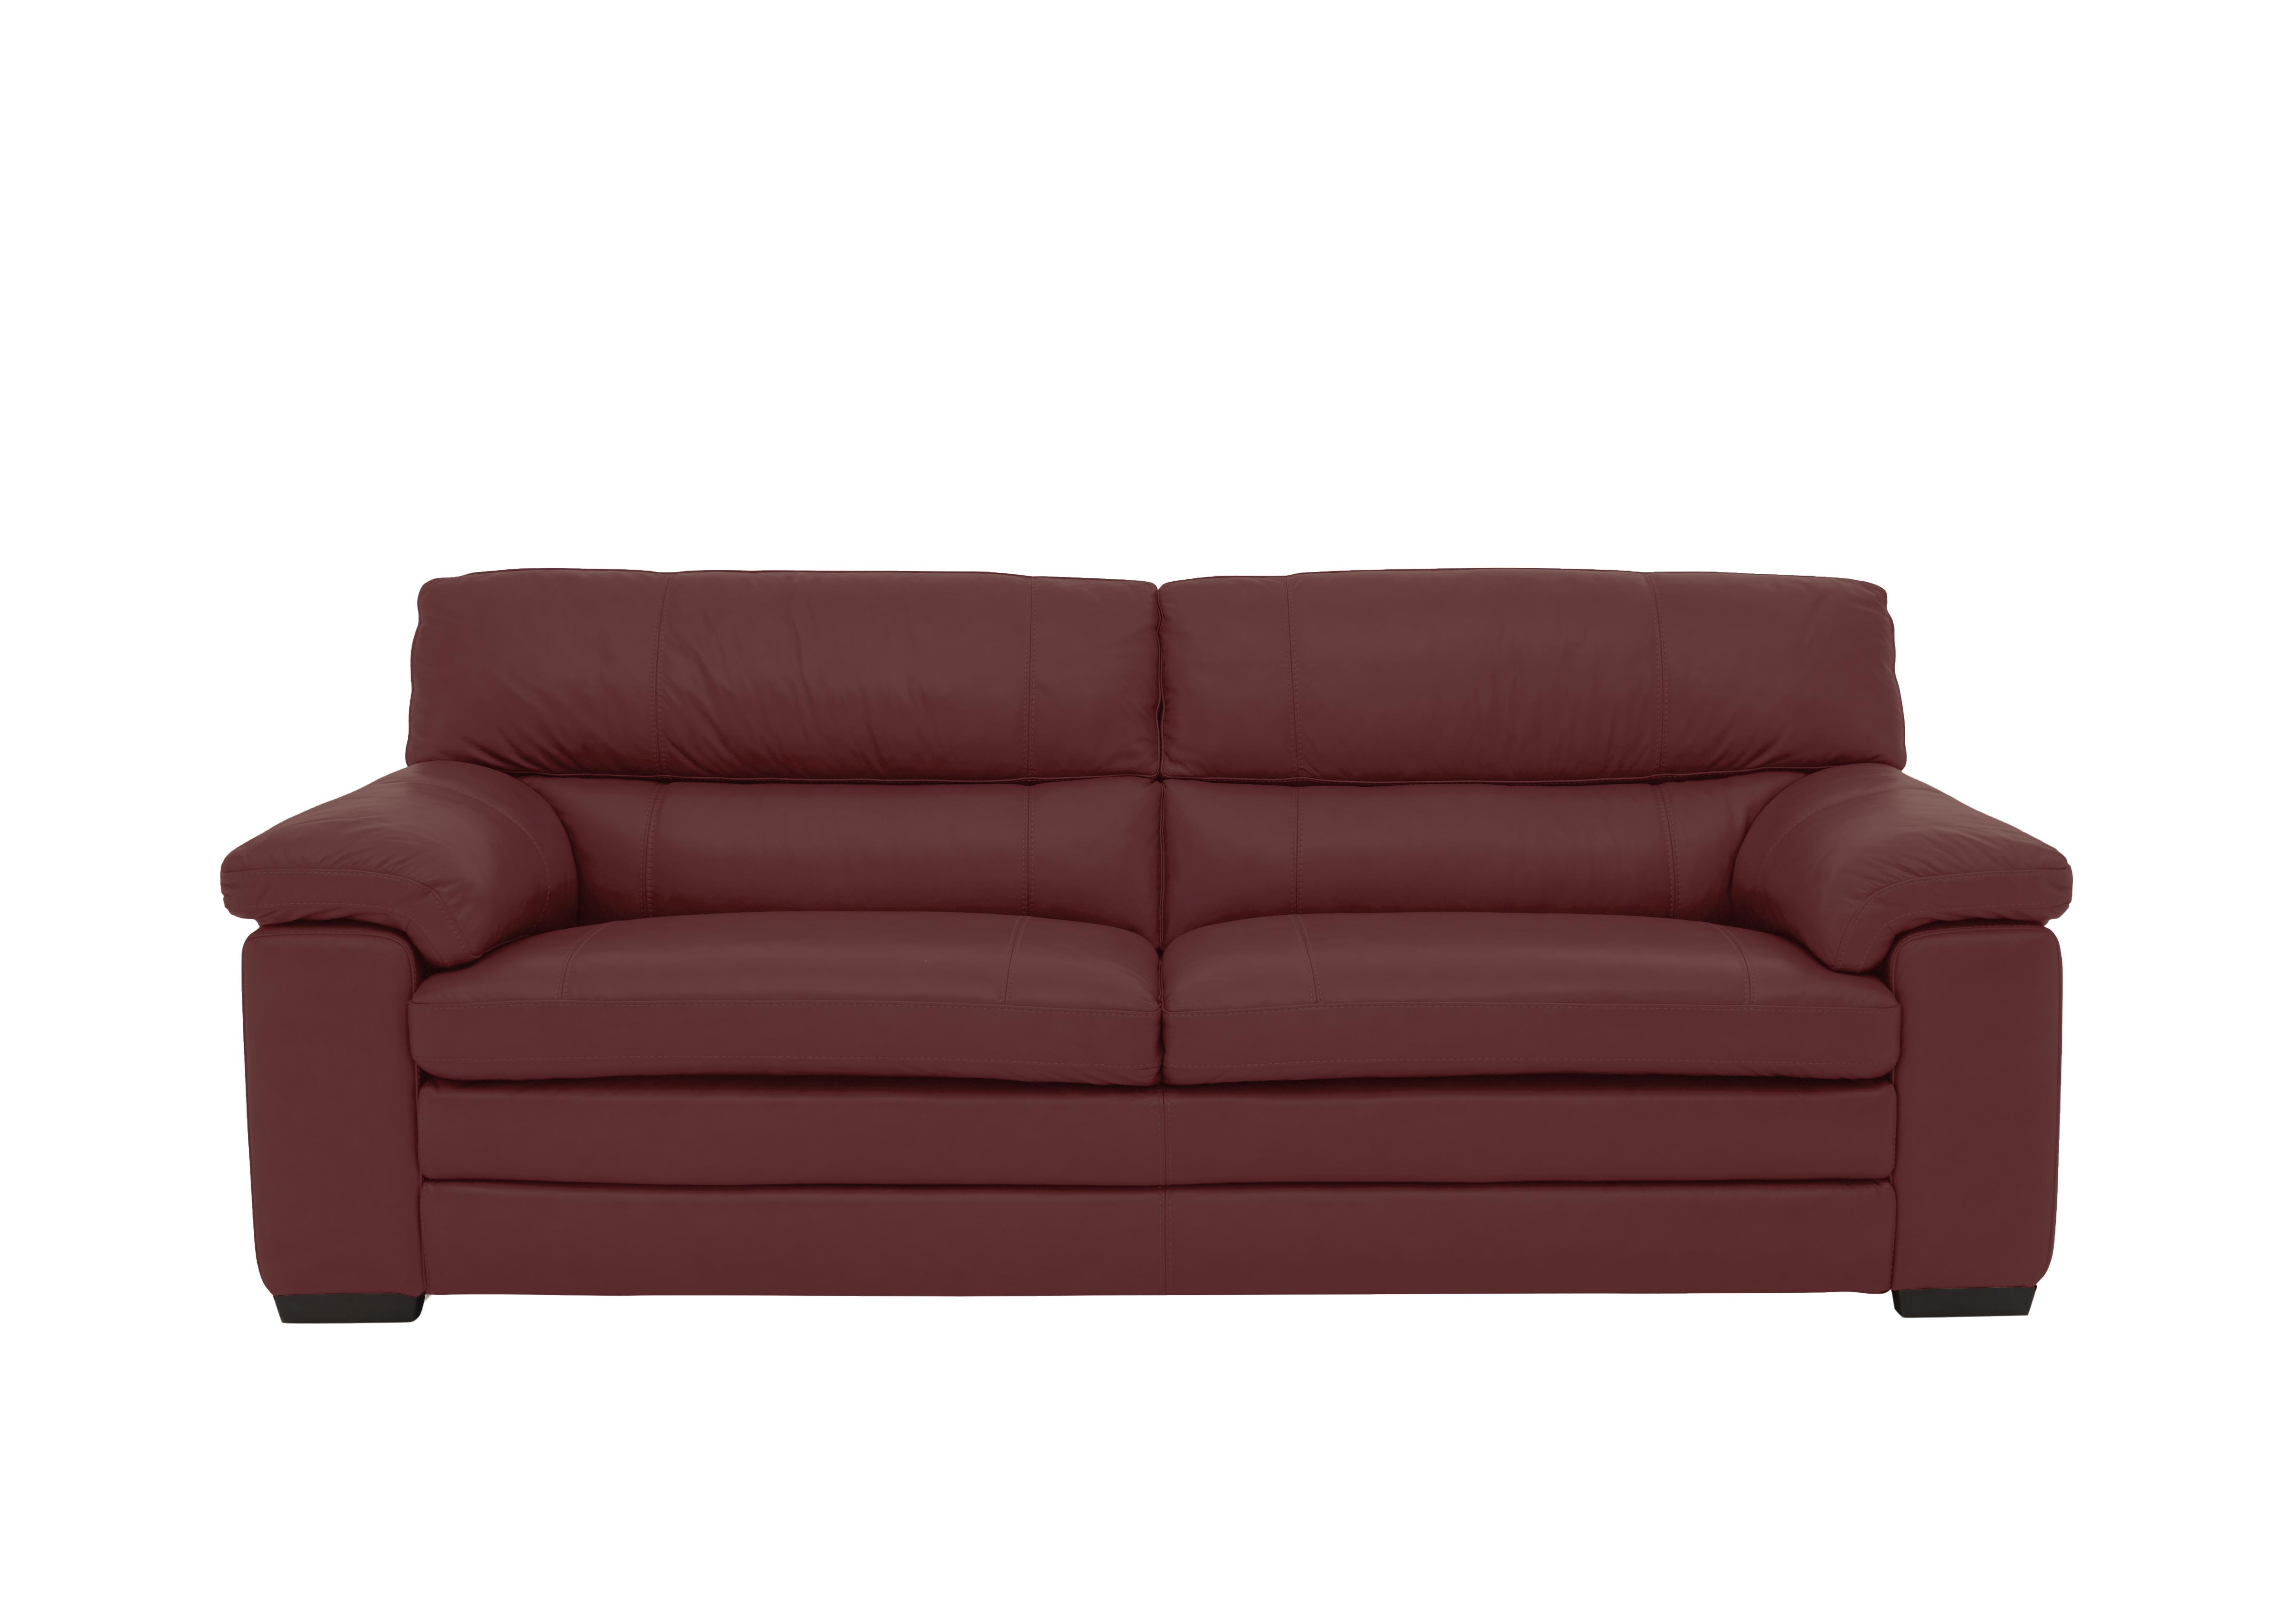 Cozee 3 Seater Pure Premium Leather Sofa in Bv-035c Deep Red on Furniture Village